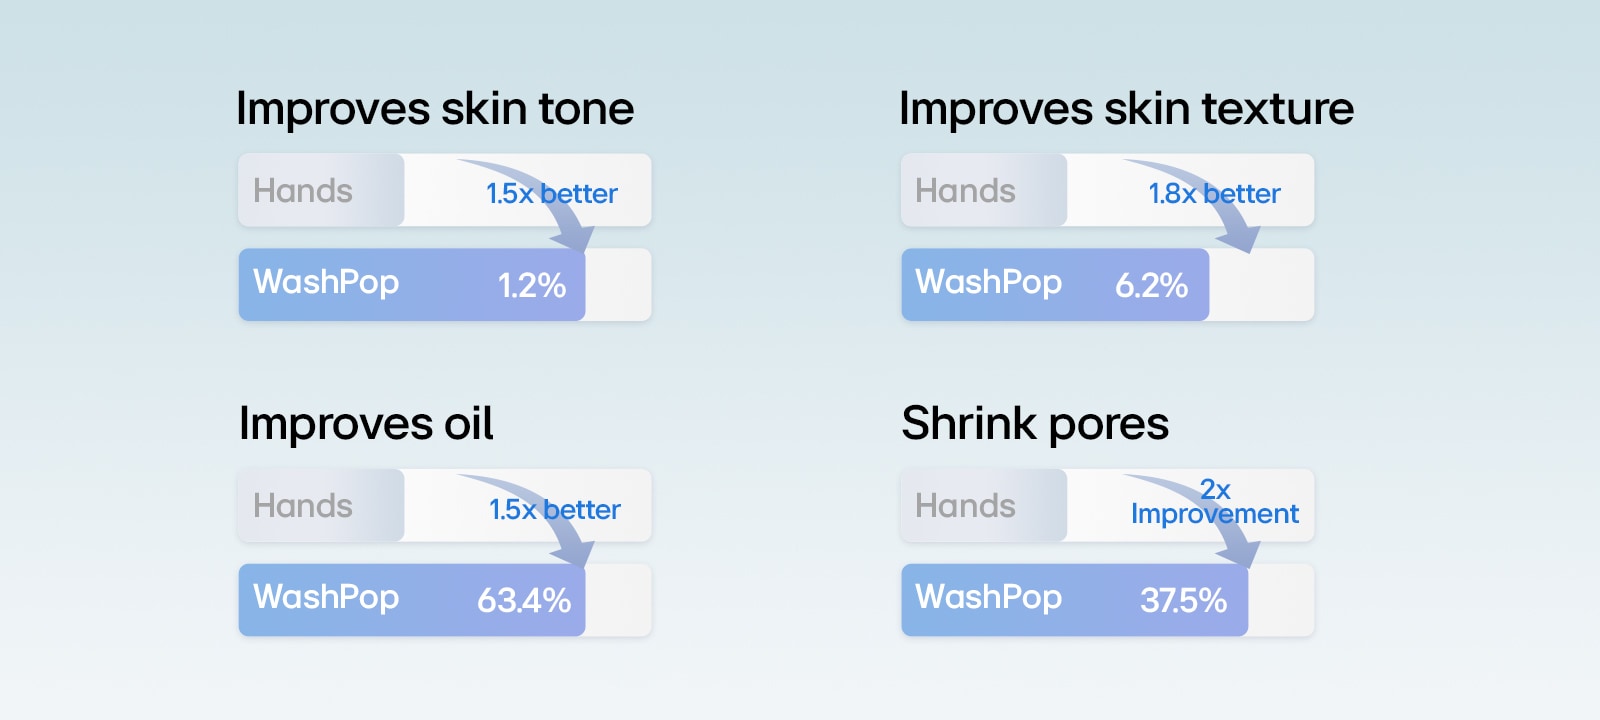 It shows the difference in skin improvement between using hands and using WashPop in a graph.